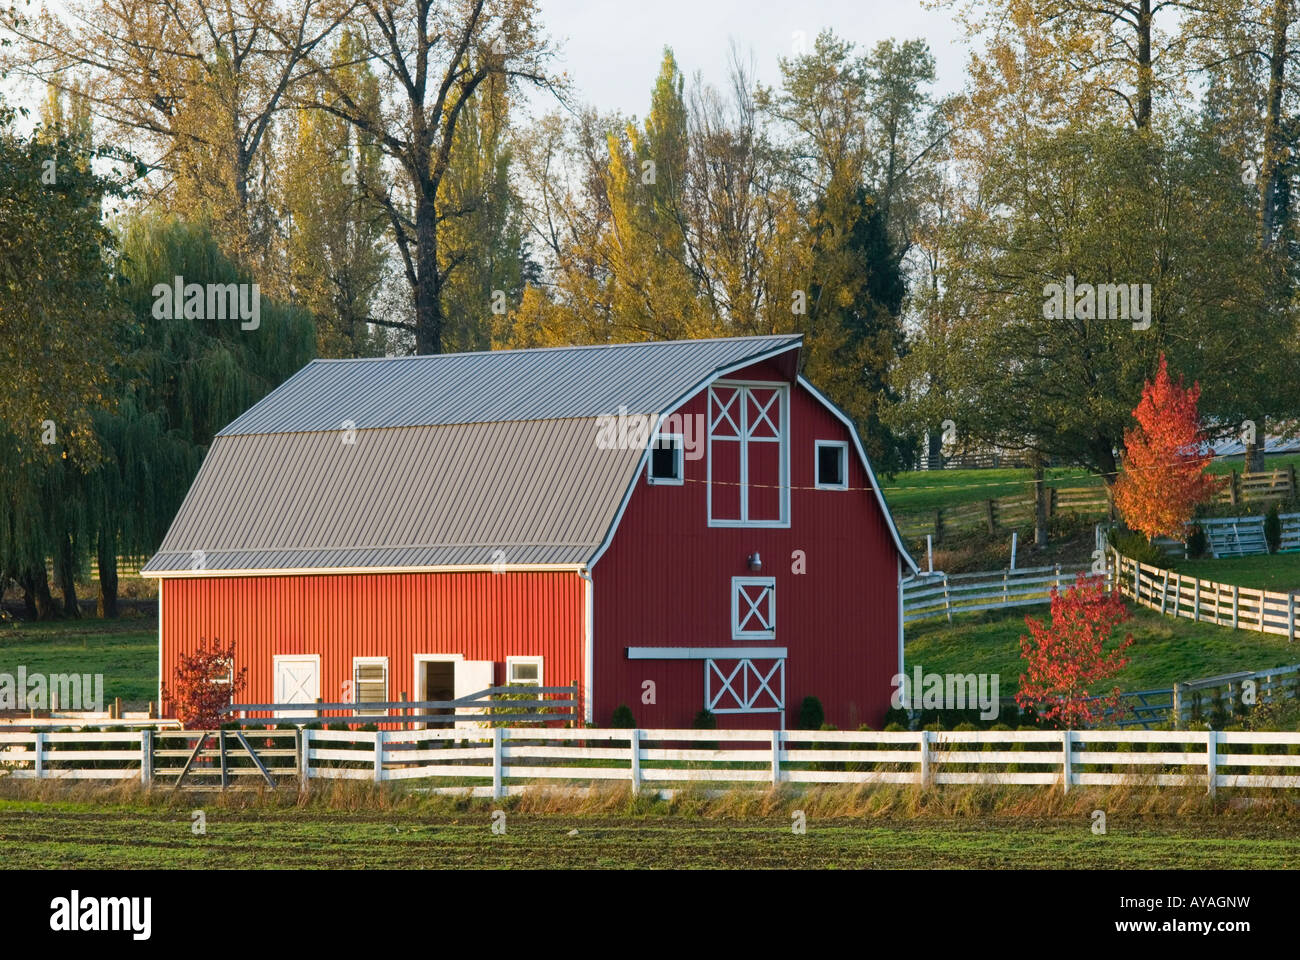 A red barn on a small rural farm Stock Photo